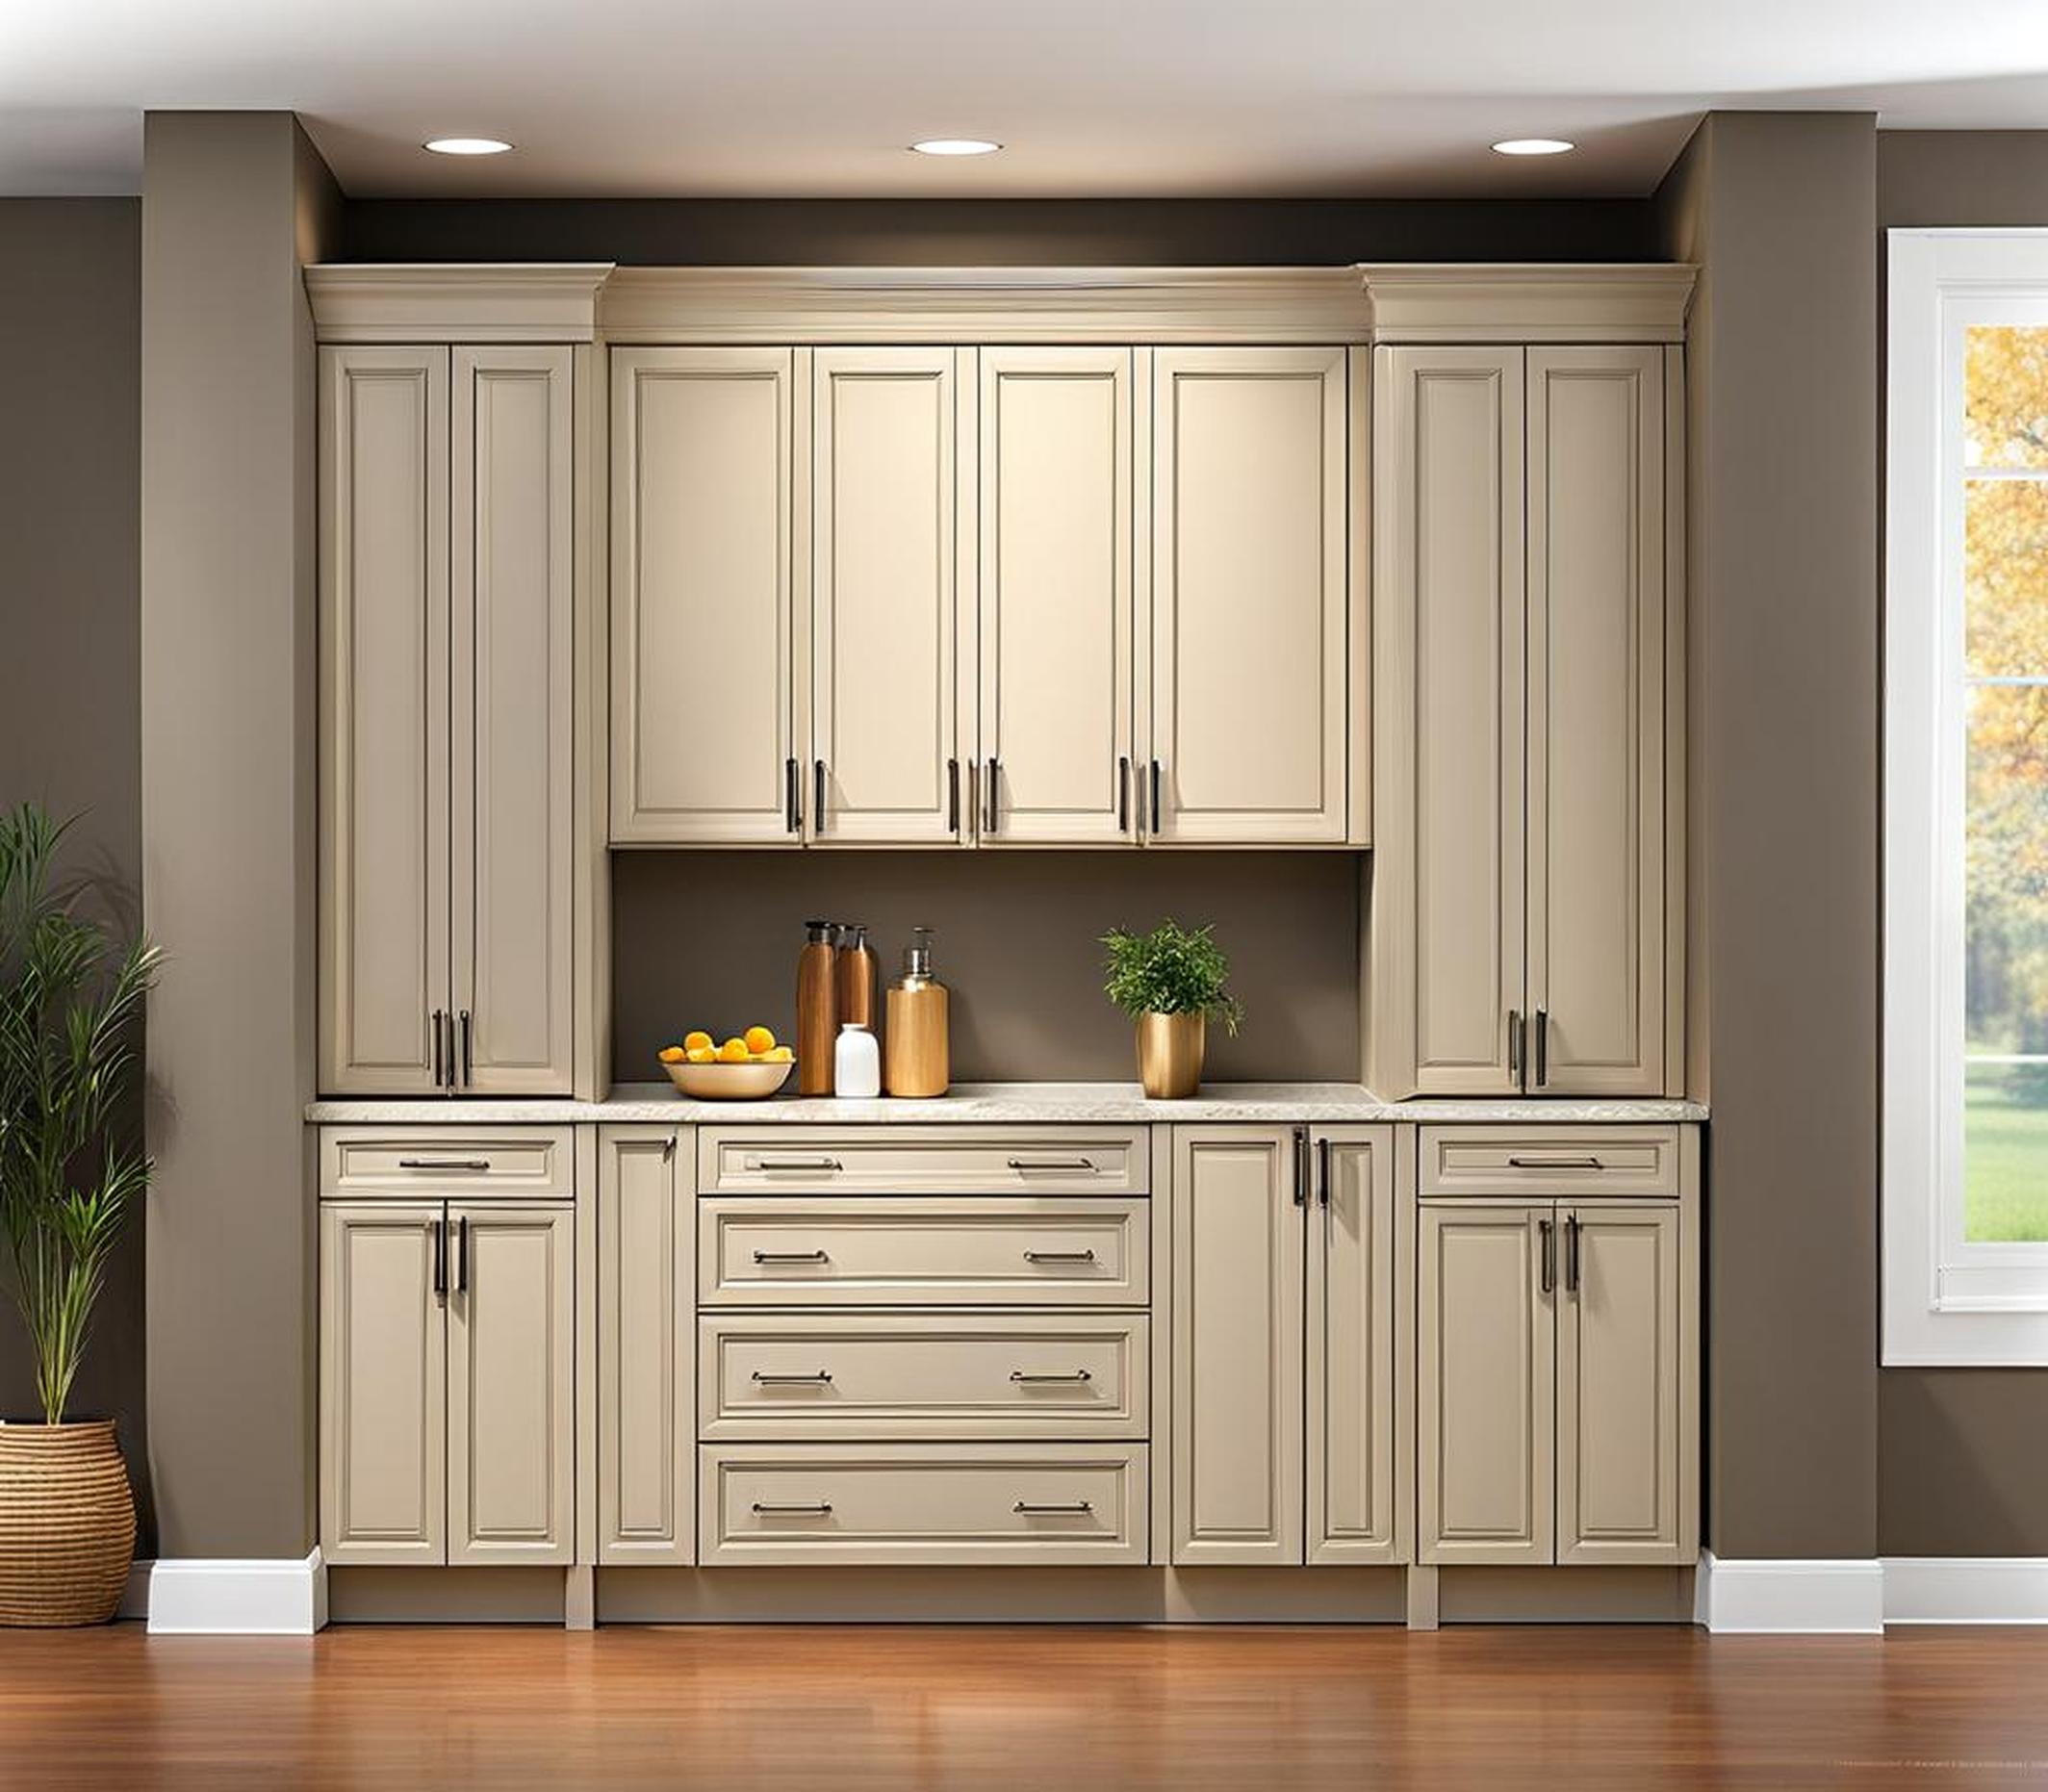 how tall are kitchen cabinets